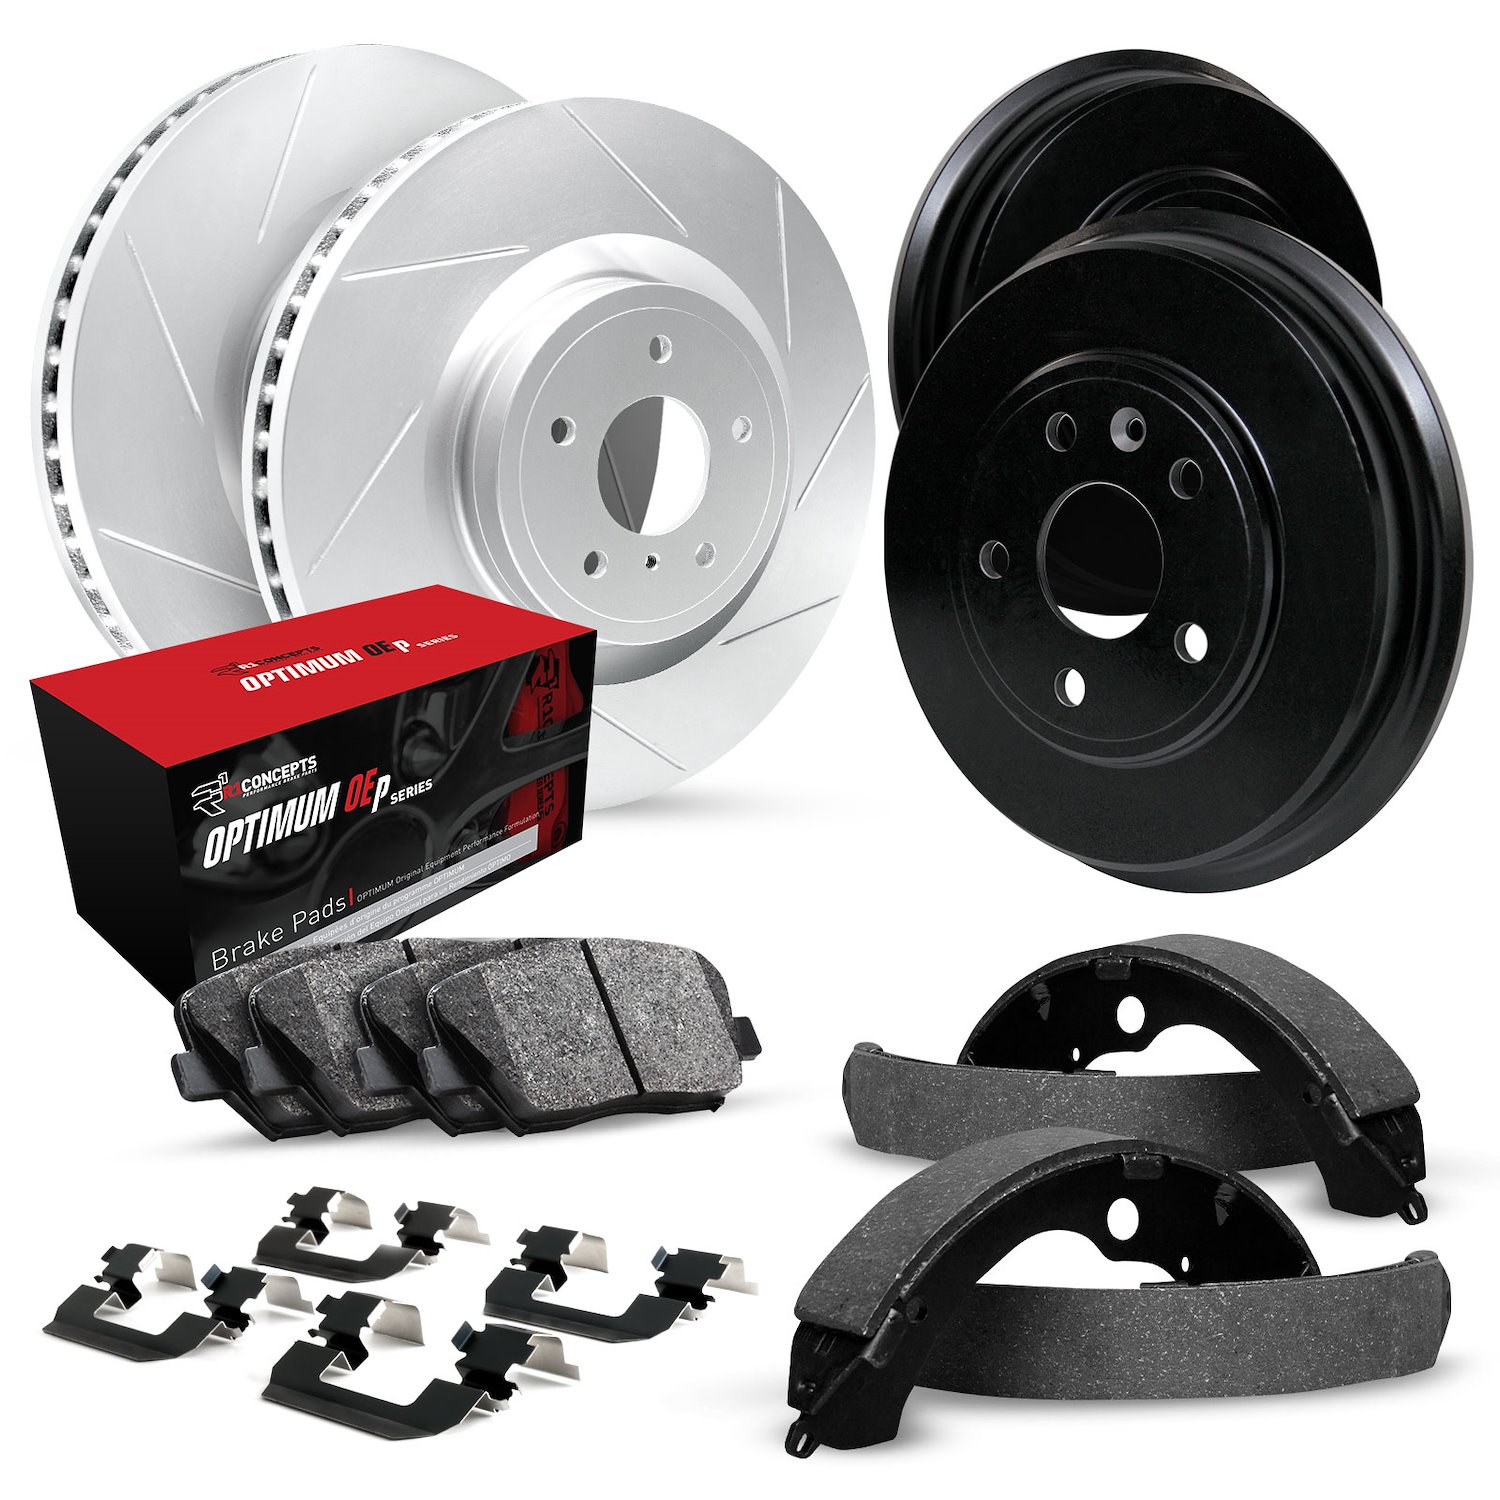 GEO-Carbon Slotted Brake Rotor & Drum Set w/Optimum OE Pads, Shoes, & Hardware, 1983-1989 GM, Position: Front & Rear